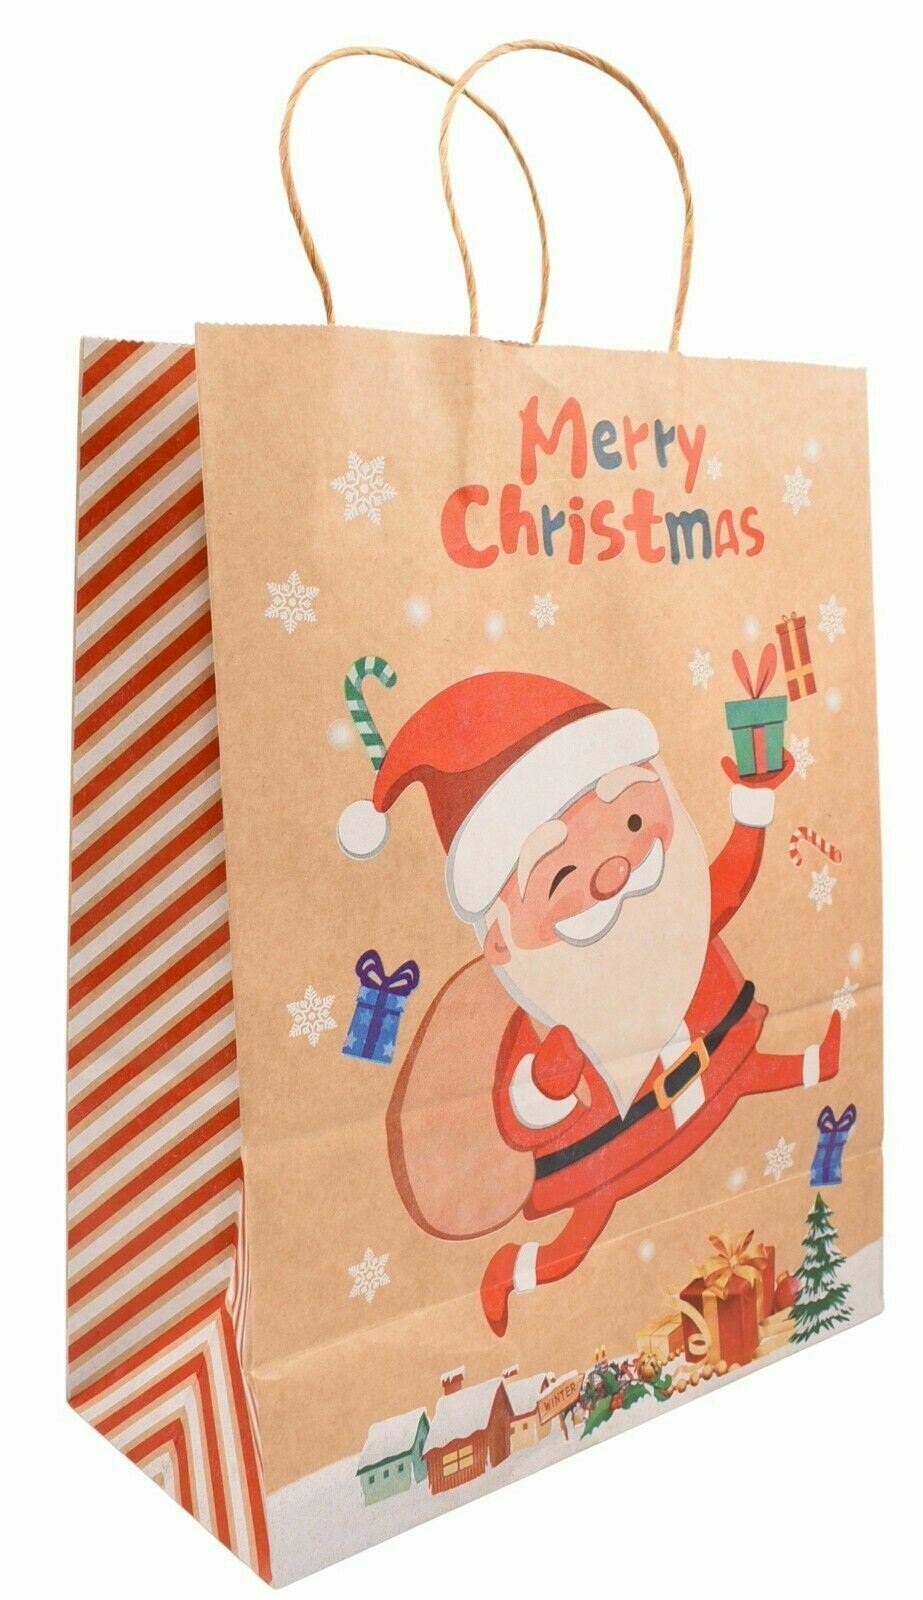 8Pcs Christmas Gift Bags - Brown Recyclable Kraft Paper Present Bags, 33x26x12cm